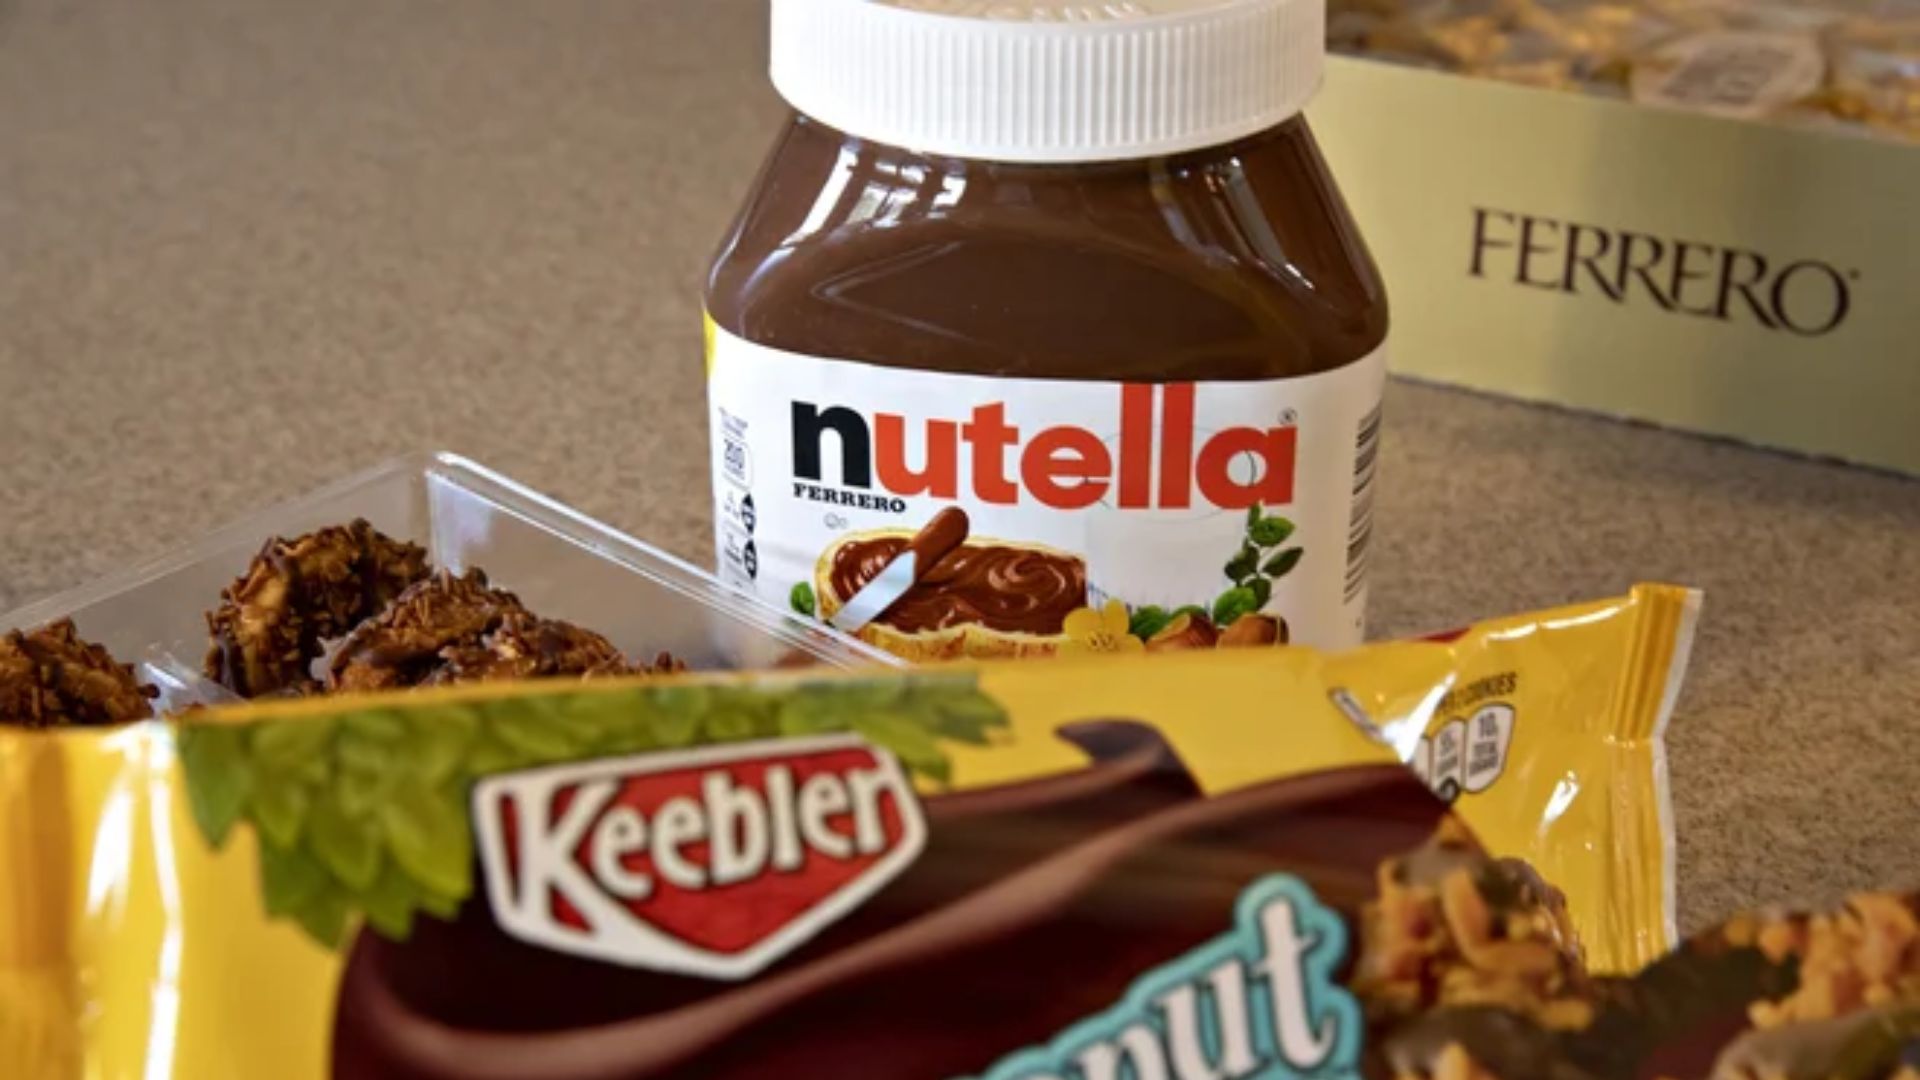 Ferrero group is in a global creative review that may wrap soon